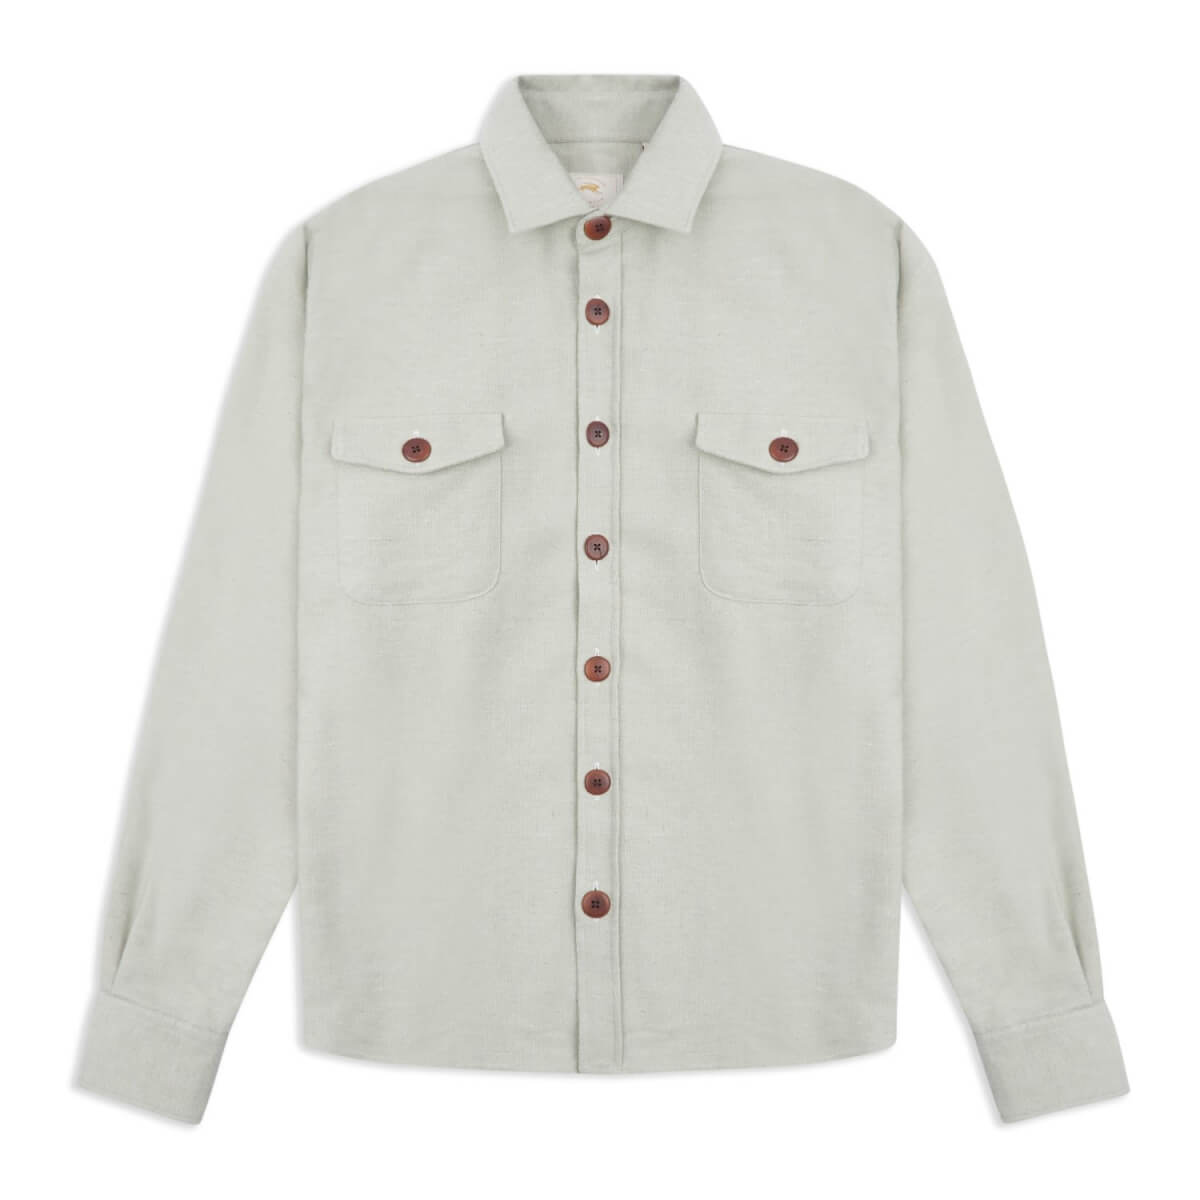 Men's Green Over Shirt - Sage Small Burrows & Hare